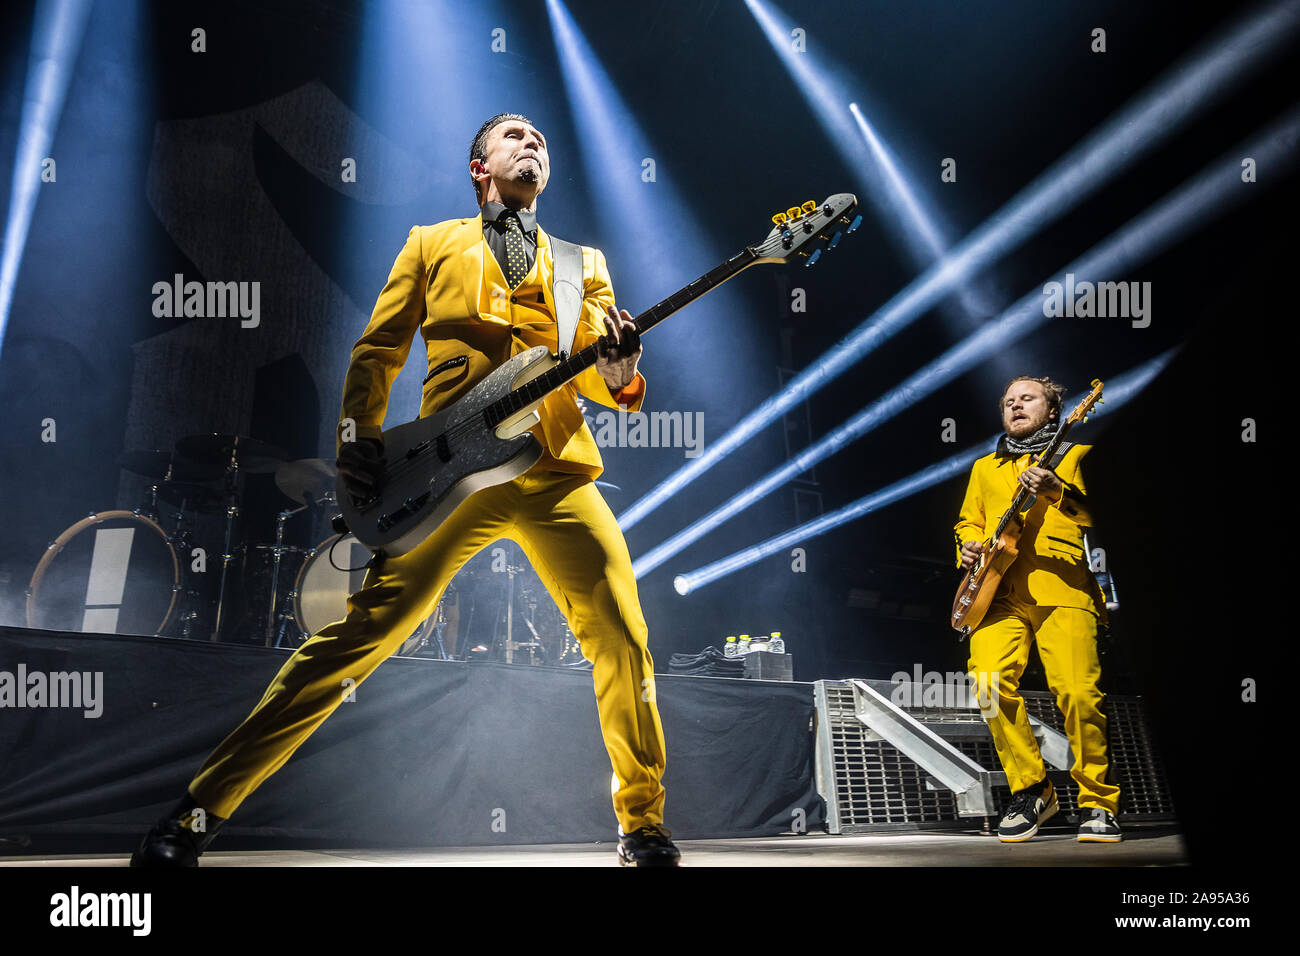 Copenhagen, Denmark. 12th Nov, 2019. The American hard rock band Shinedown  performs a live concert at KB Hallen in Copenhagen. Here bass player Eric  Bass is seen live on stage. (Photo Credit: